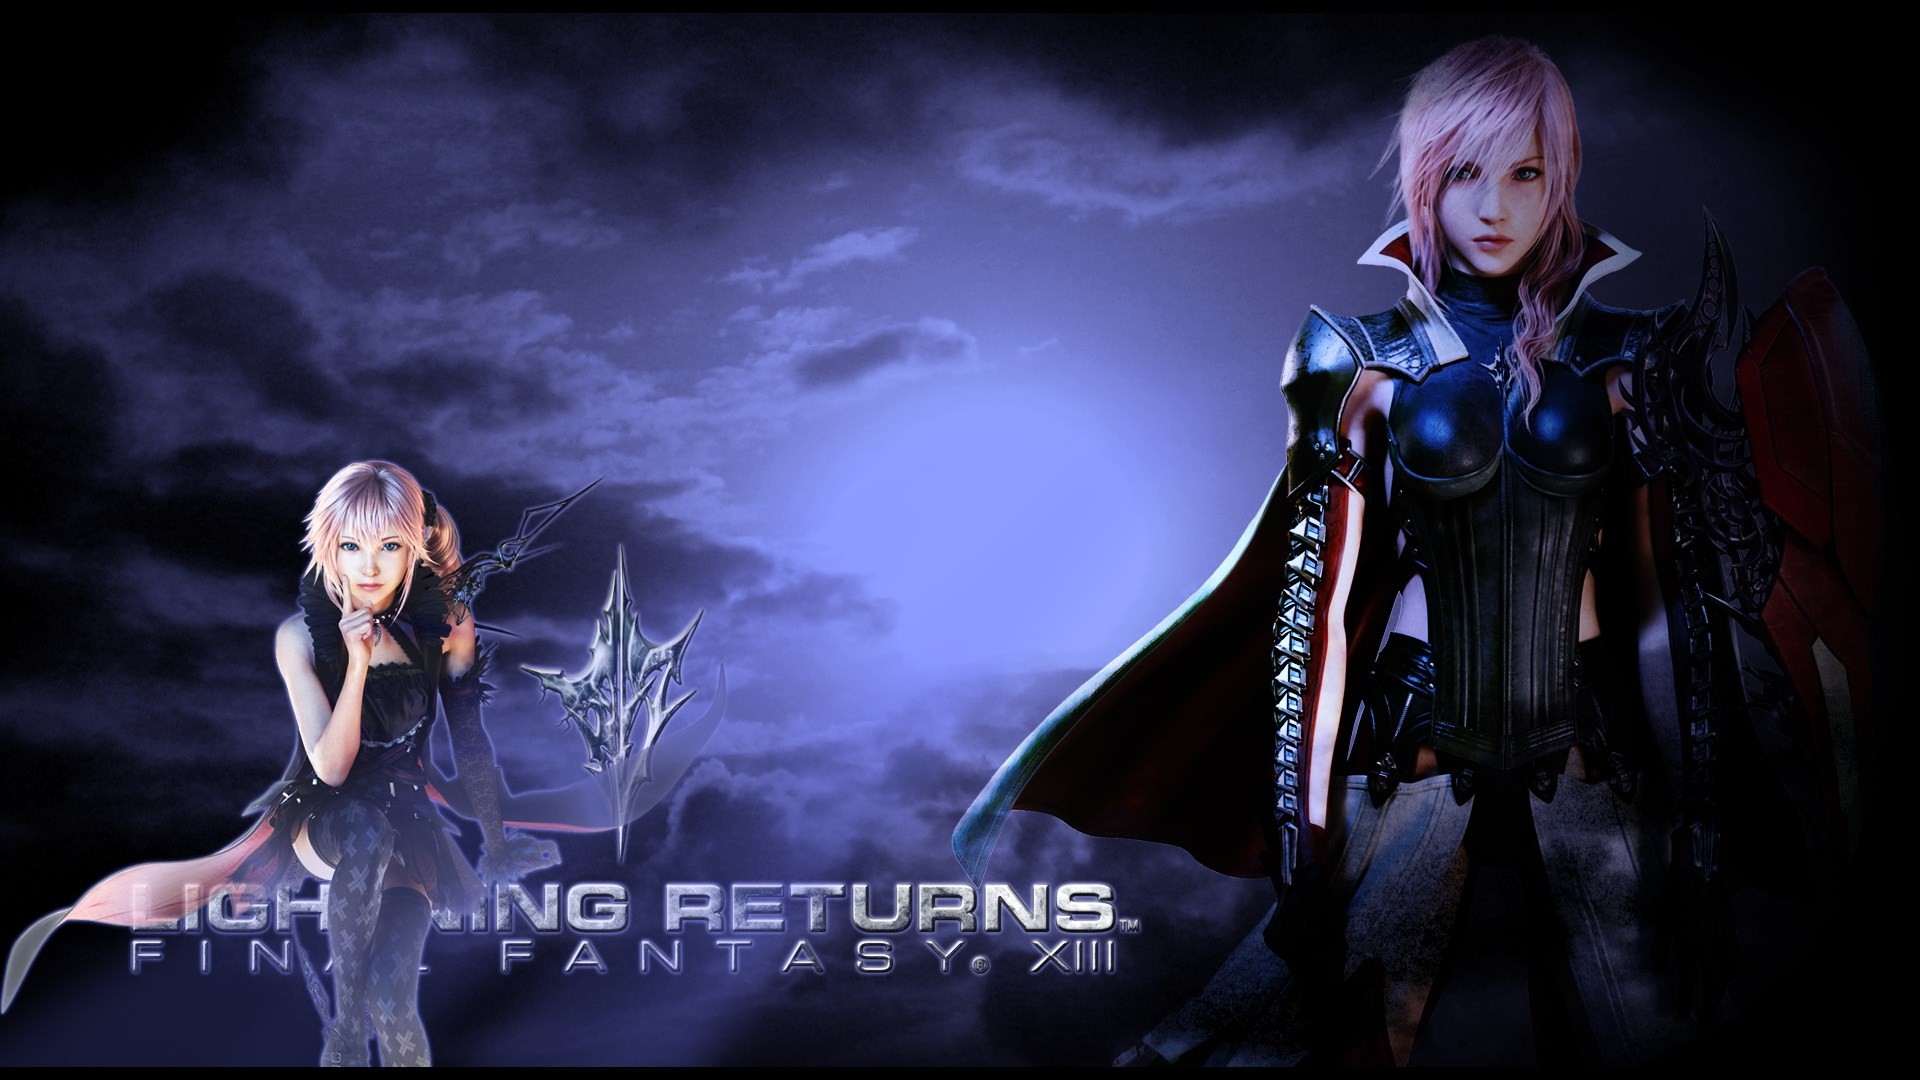 1920x1080 Pictures for Desktop: Final Fantasy XIII: Lightning Returns wallpaper -  Final Fantasy XIII: Lightning Returns category